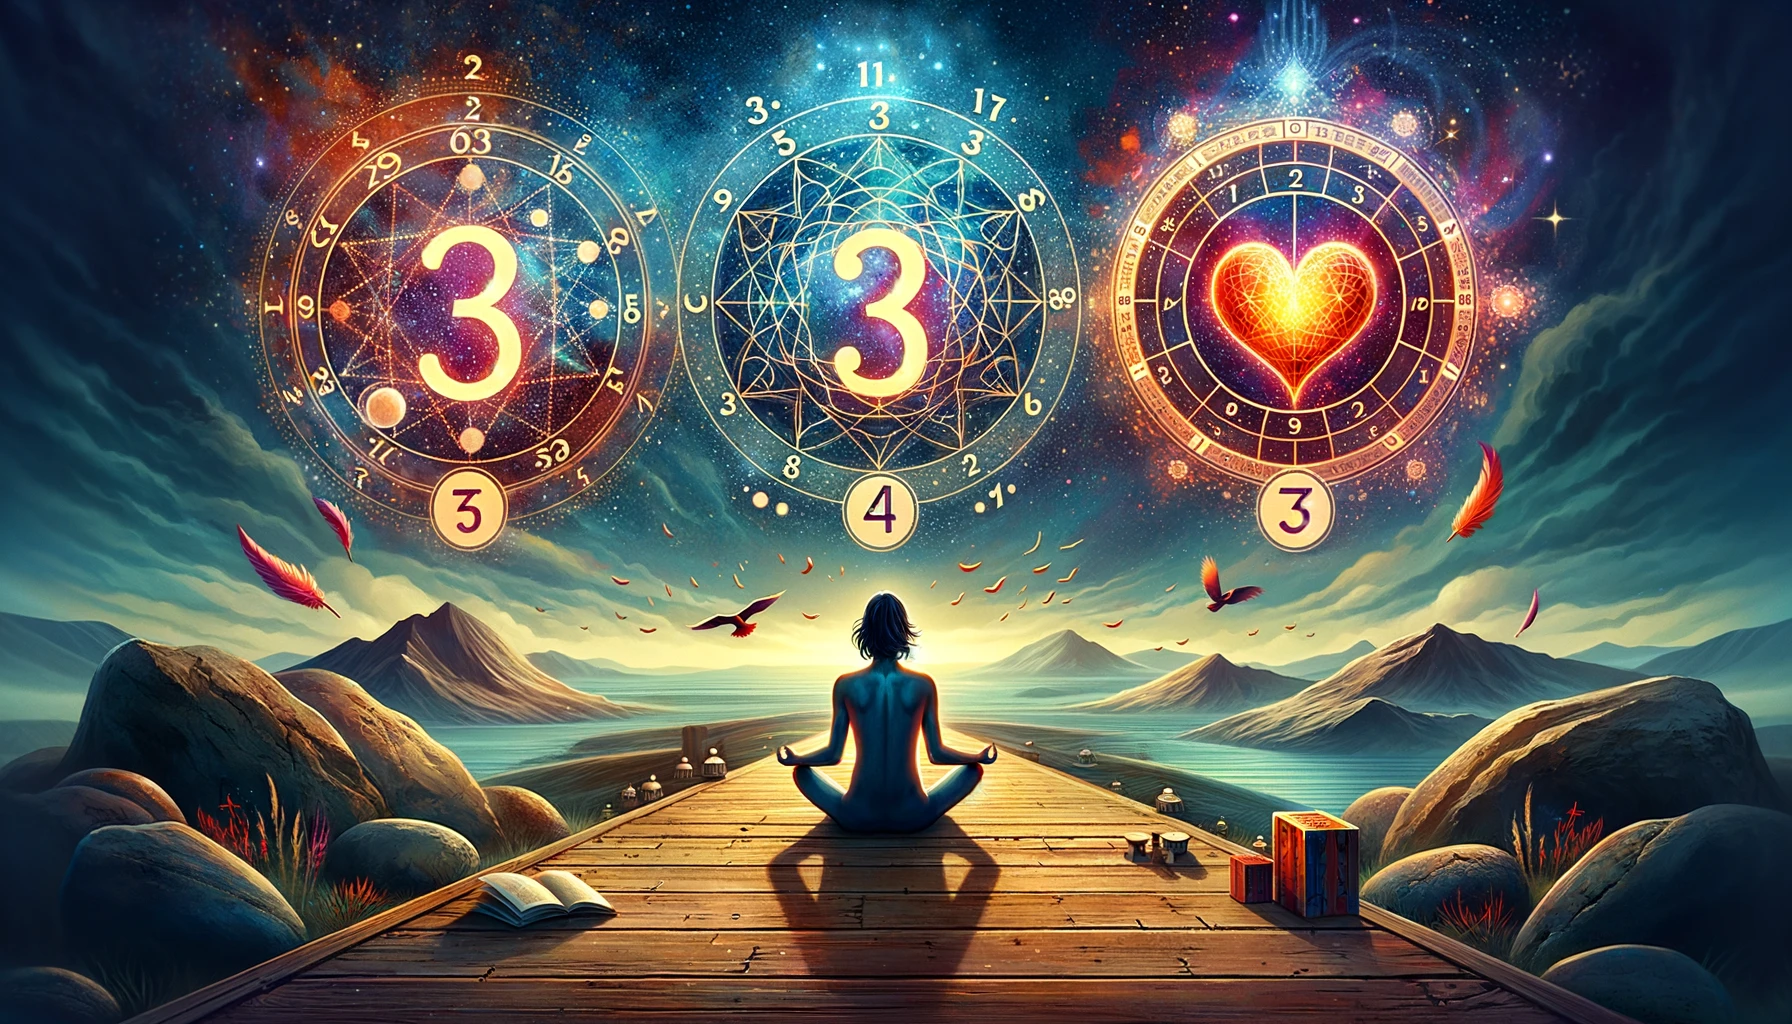 What are the 3 main numbers in numerology?